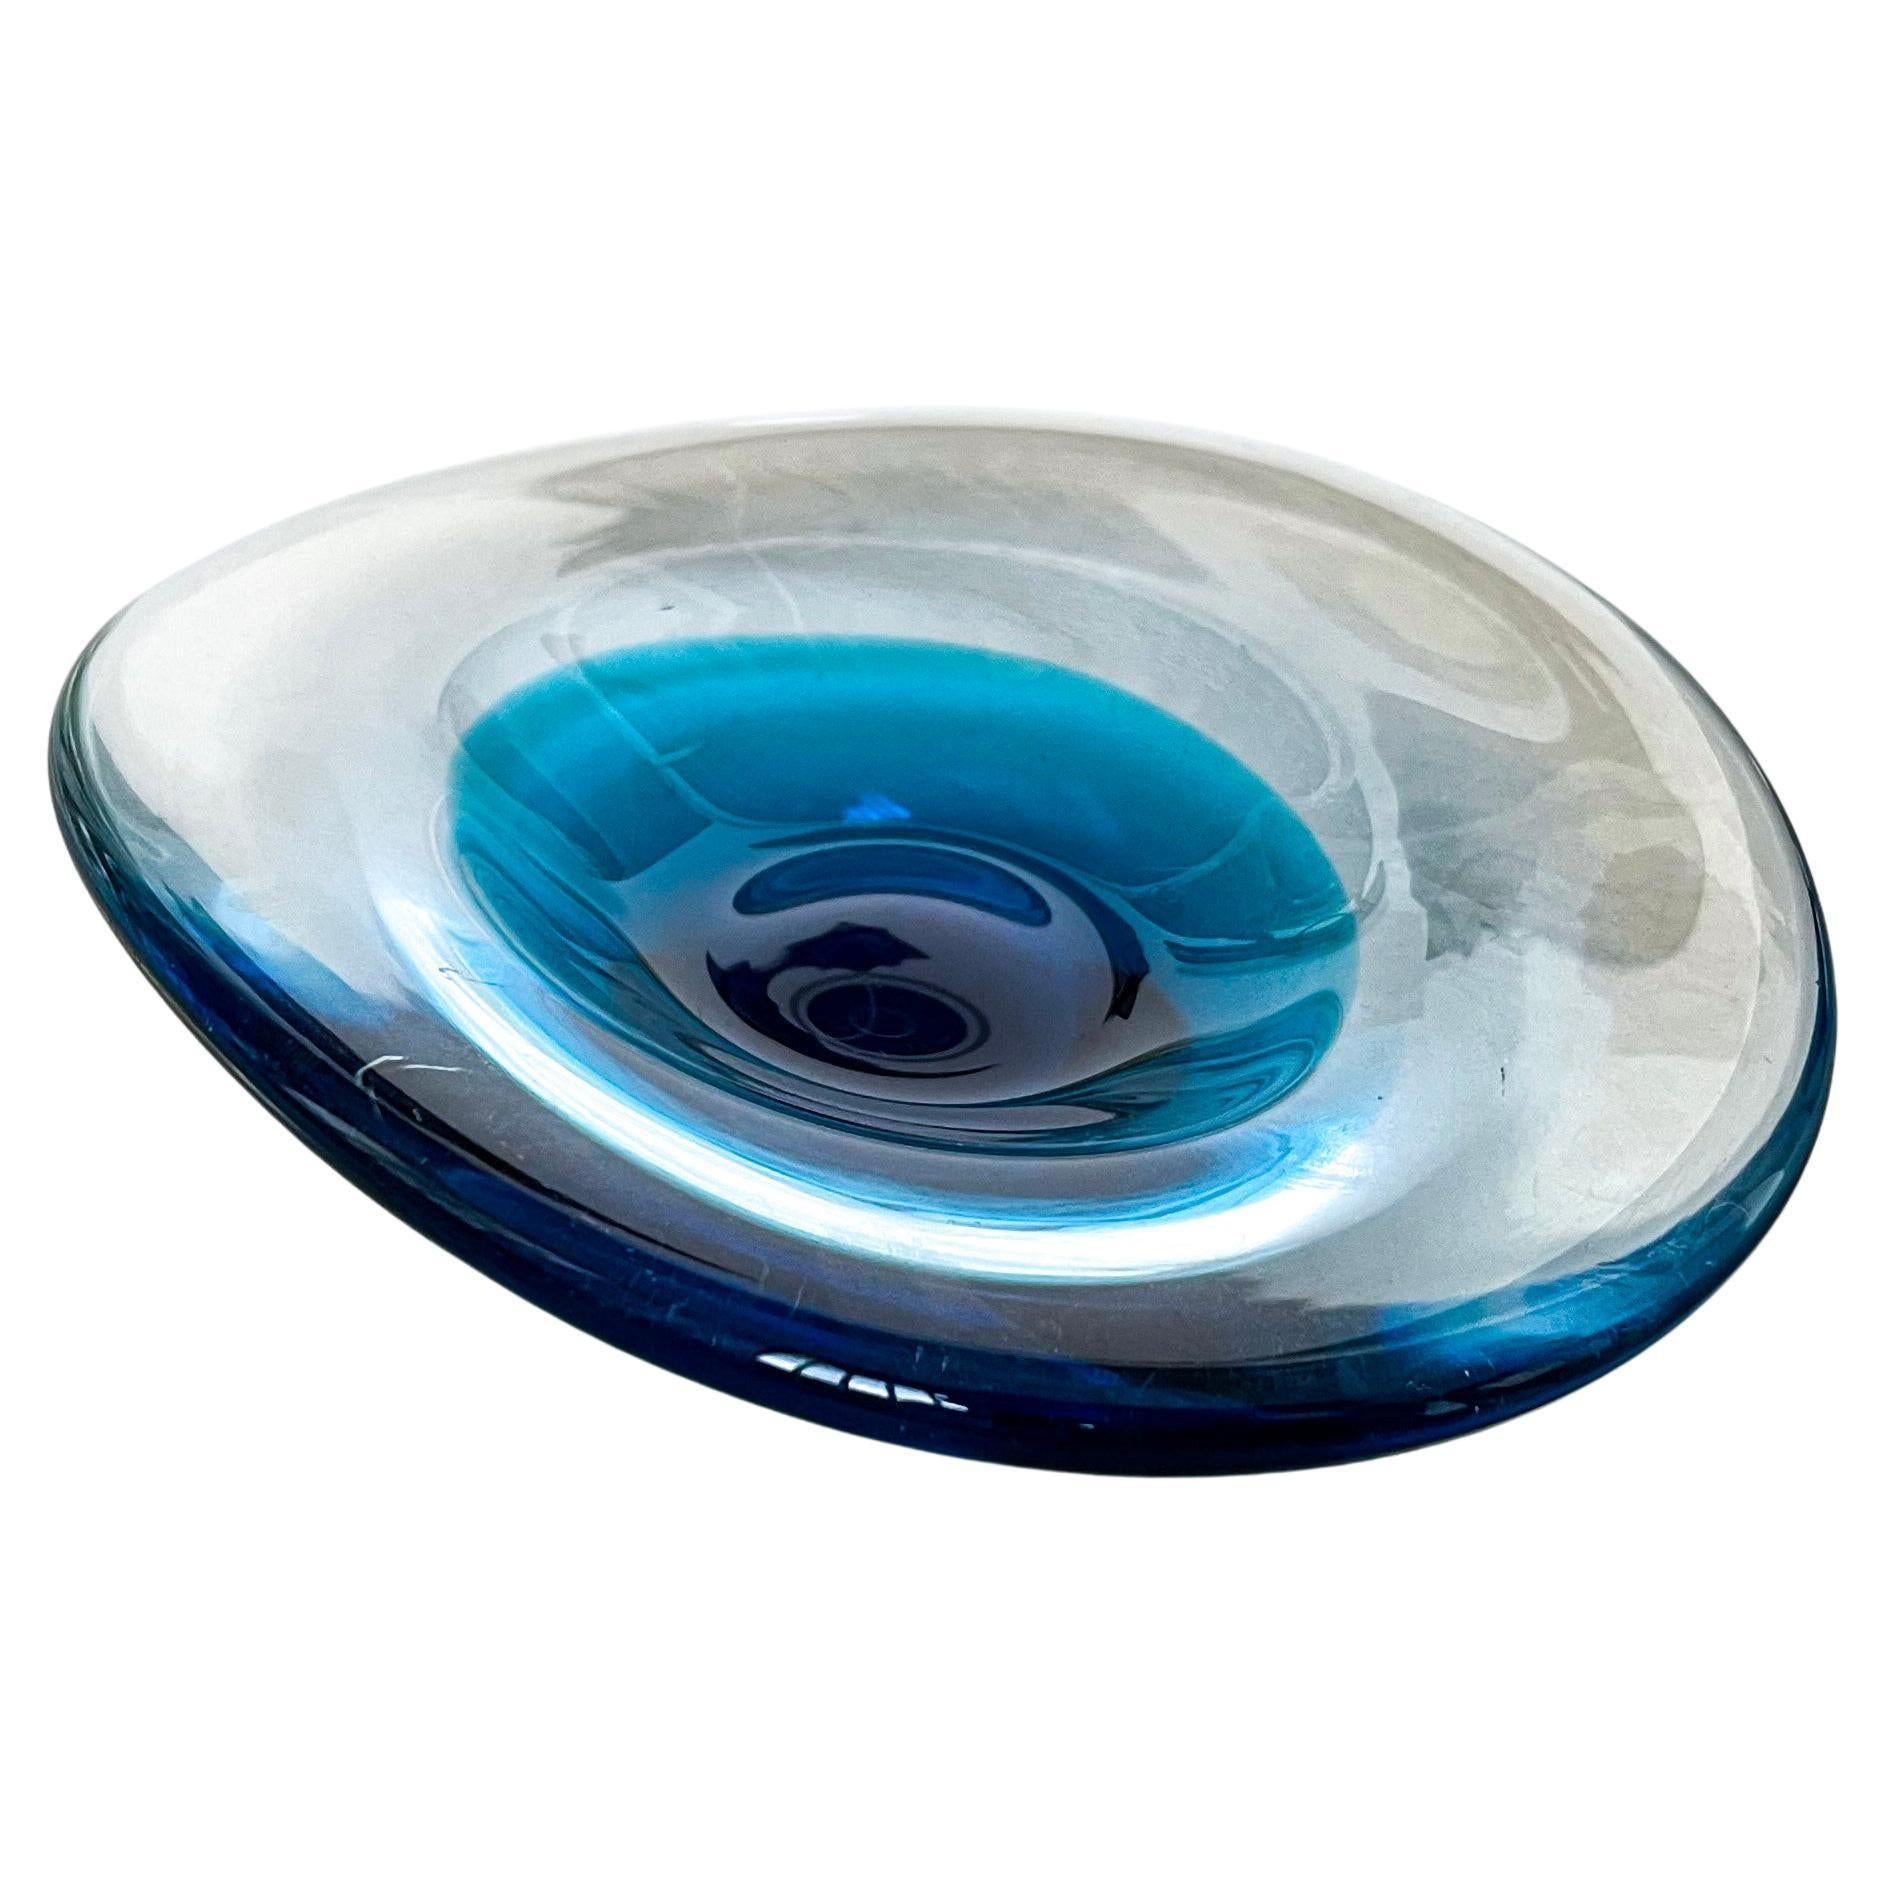 Decorative Mid-Century Modern Murano Bowl, Blue Sommerso Glass For Sale